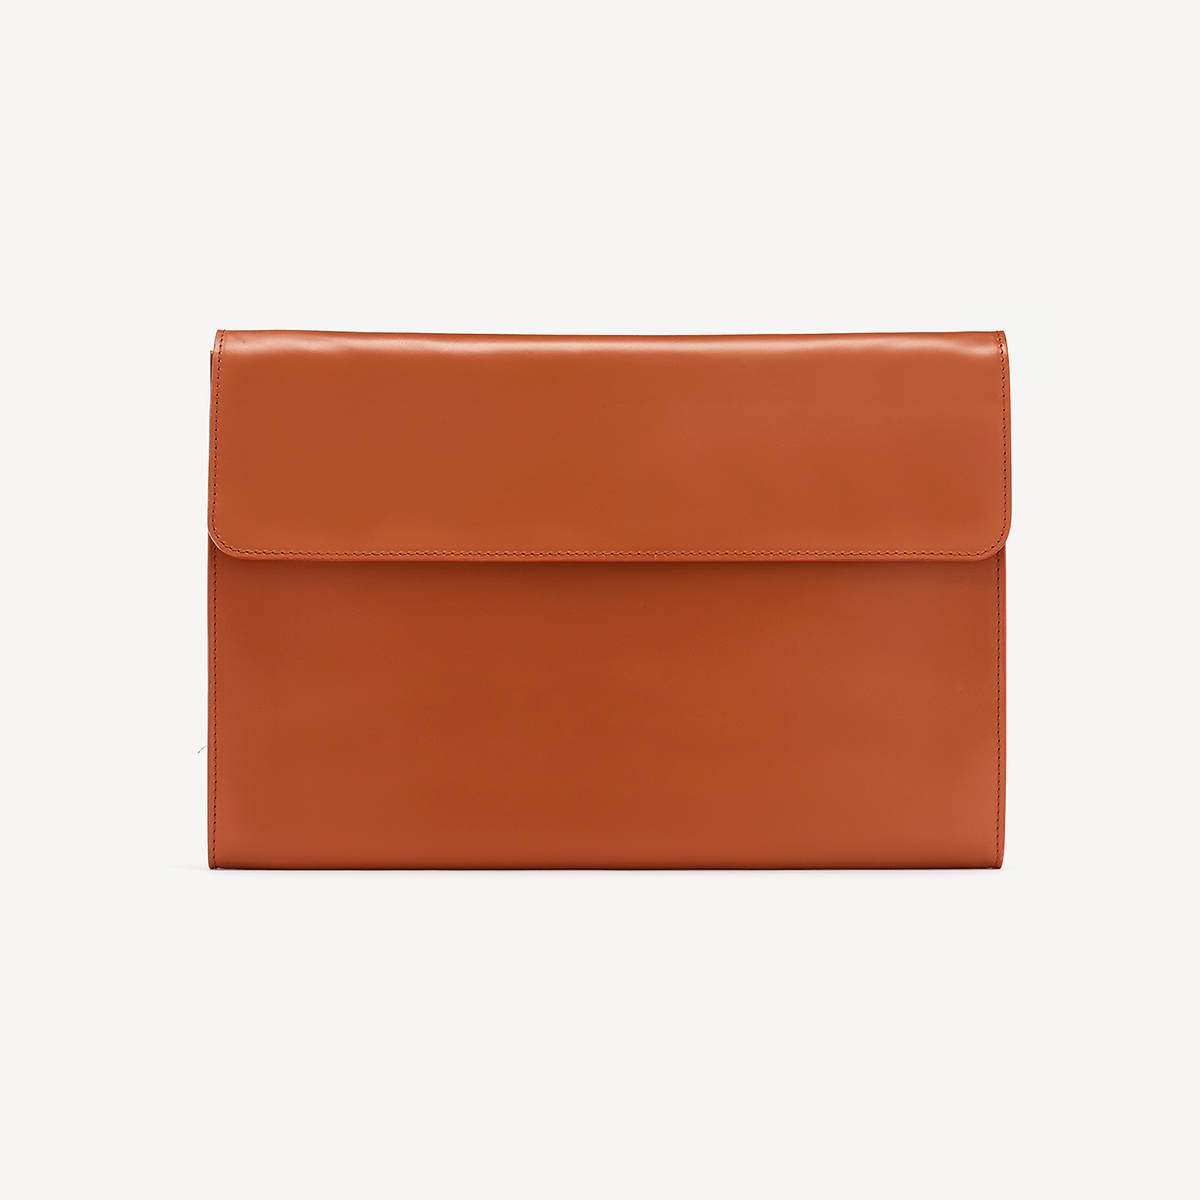 Eton Document Holder - London Tan with Beige suede lining - Swaine